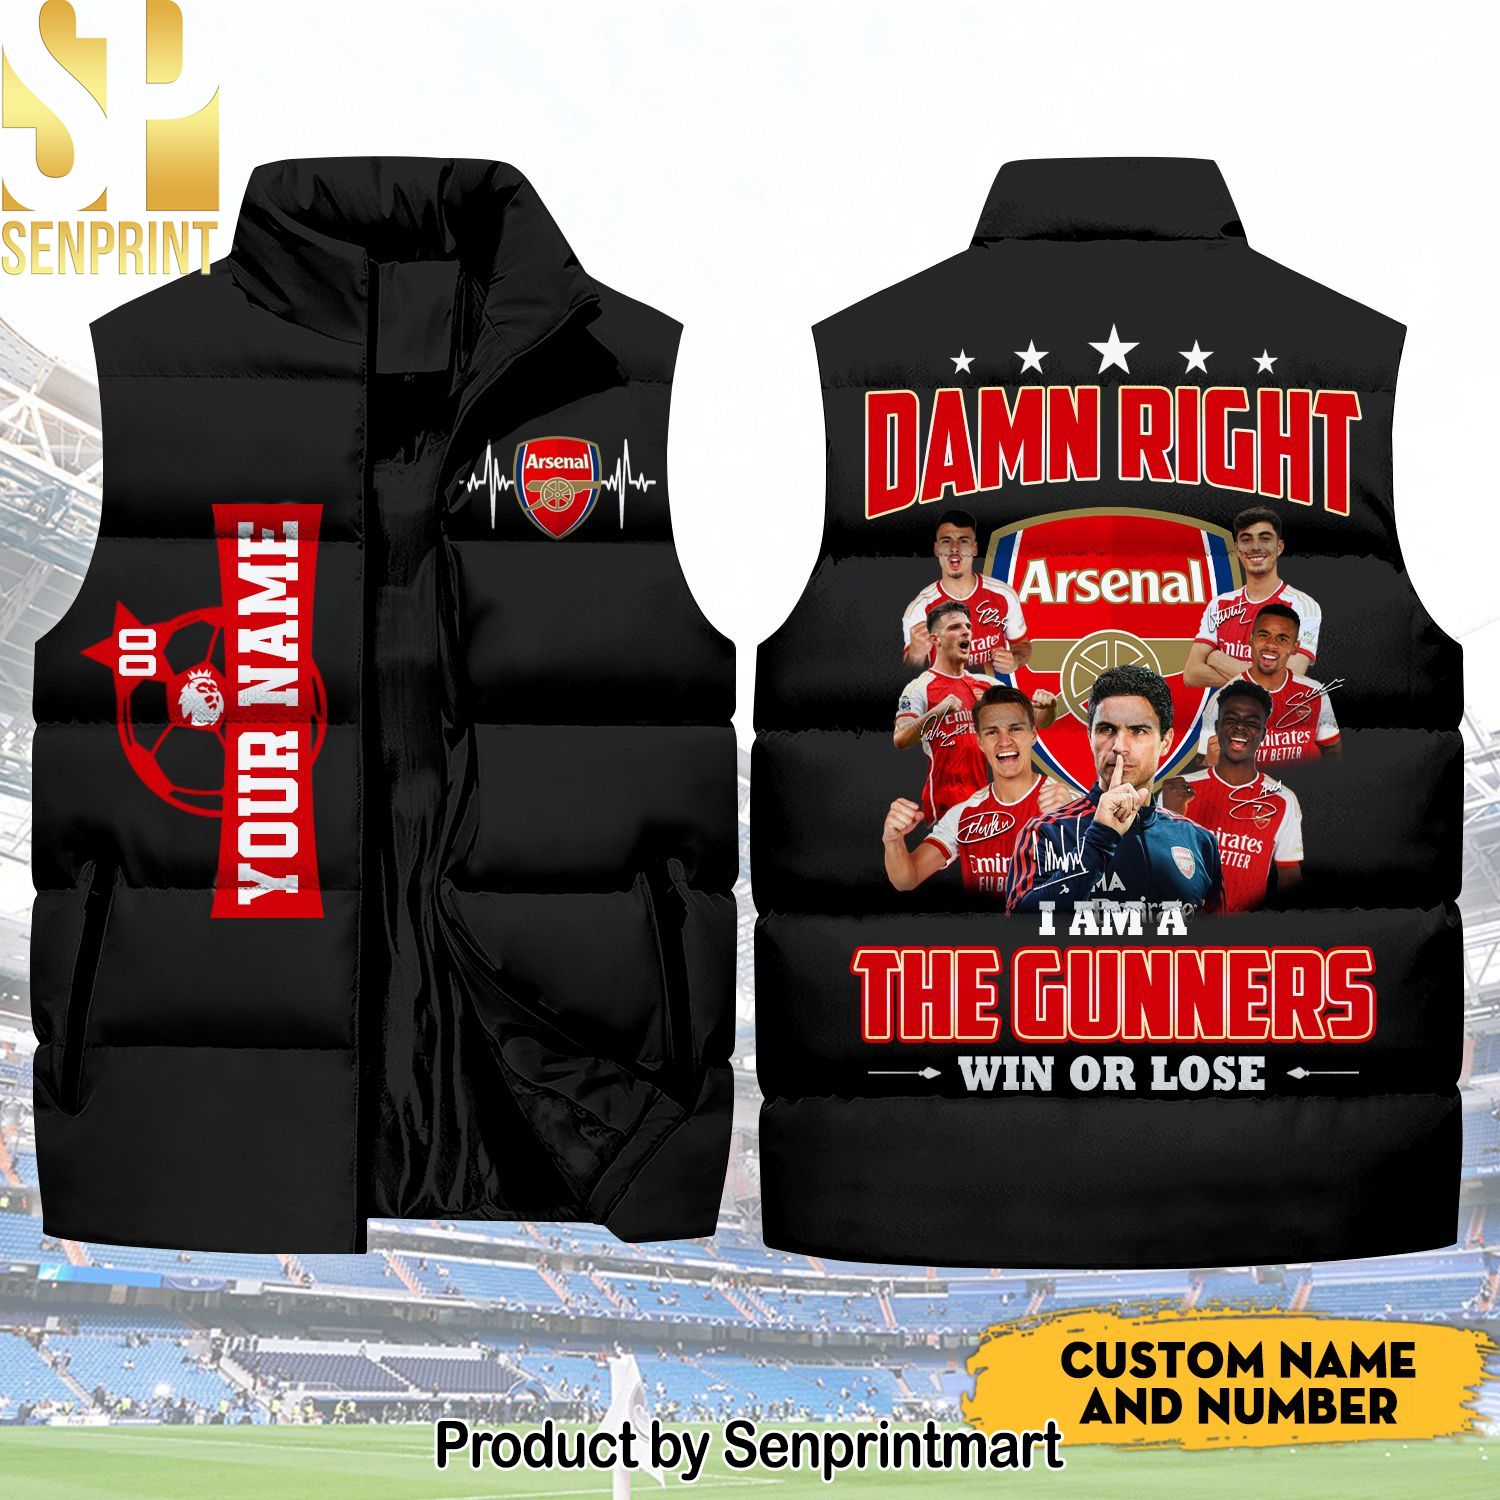 Damn Right I Am The Gunners Arsenal And Number Hot Fashion Sleeveless Jacket